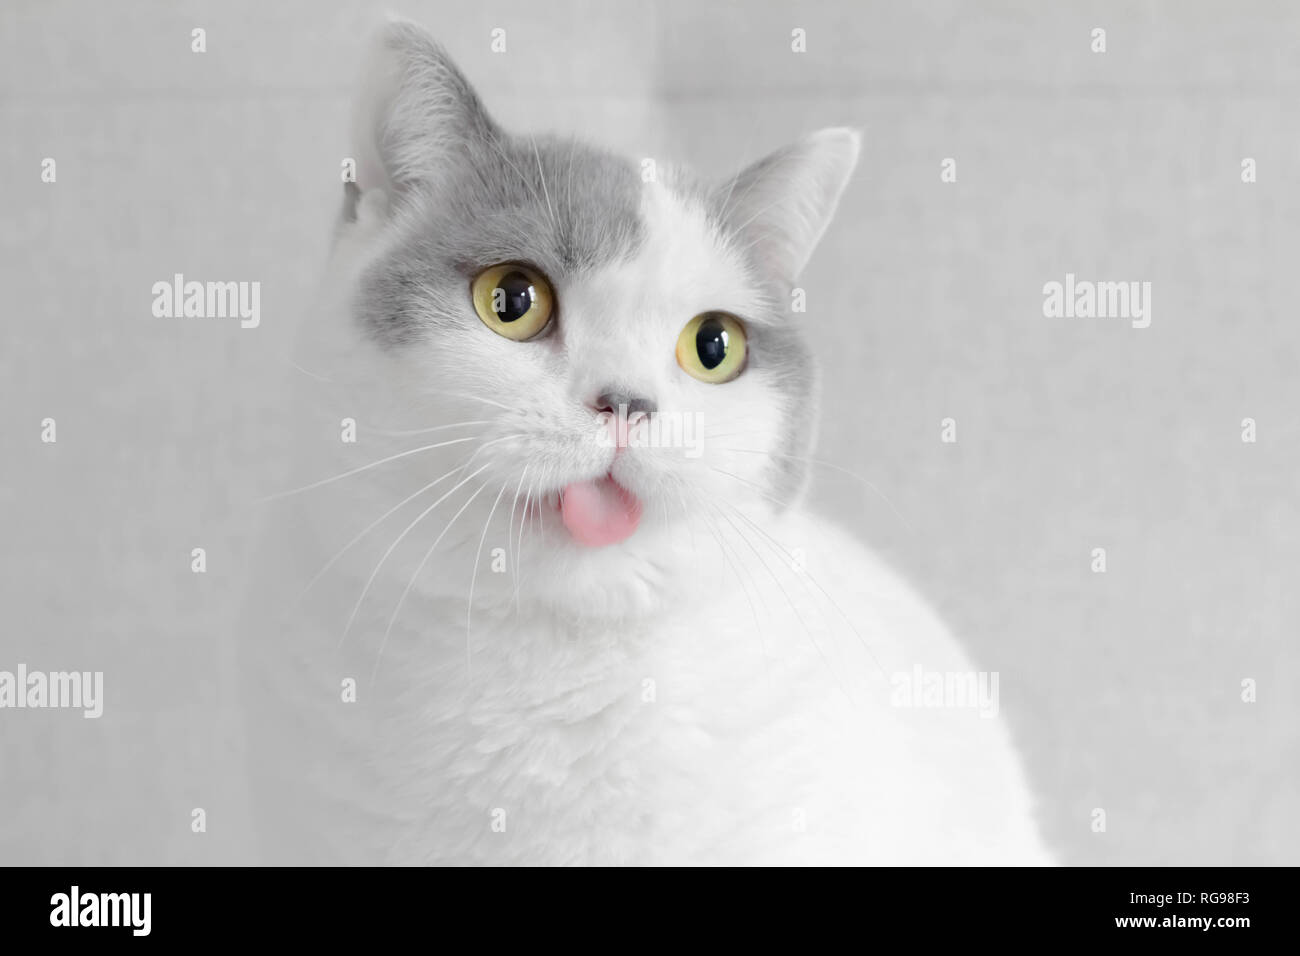 Portrait of a British shorthair cat sticking out tongue Stock Photo